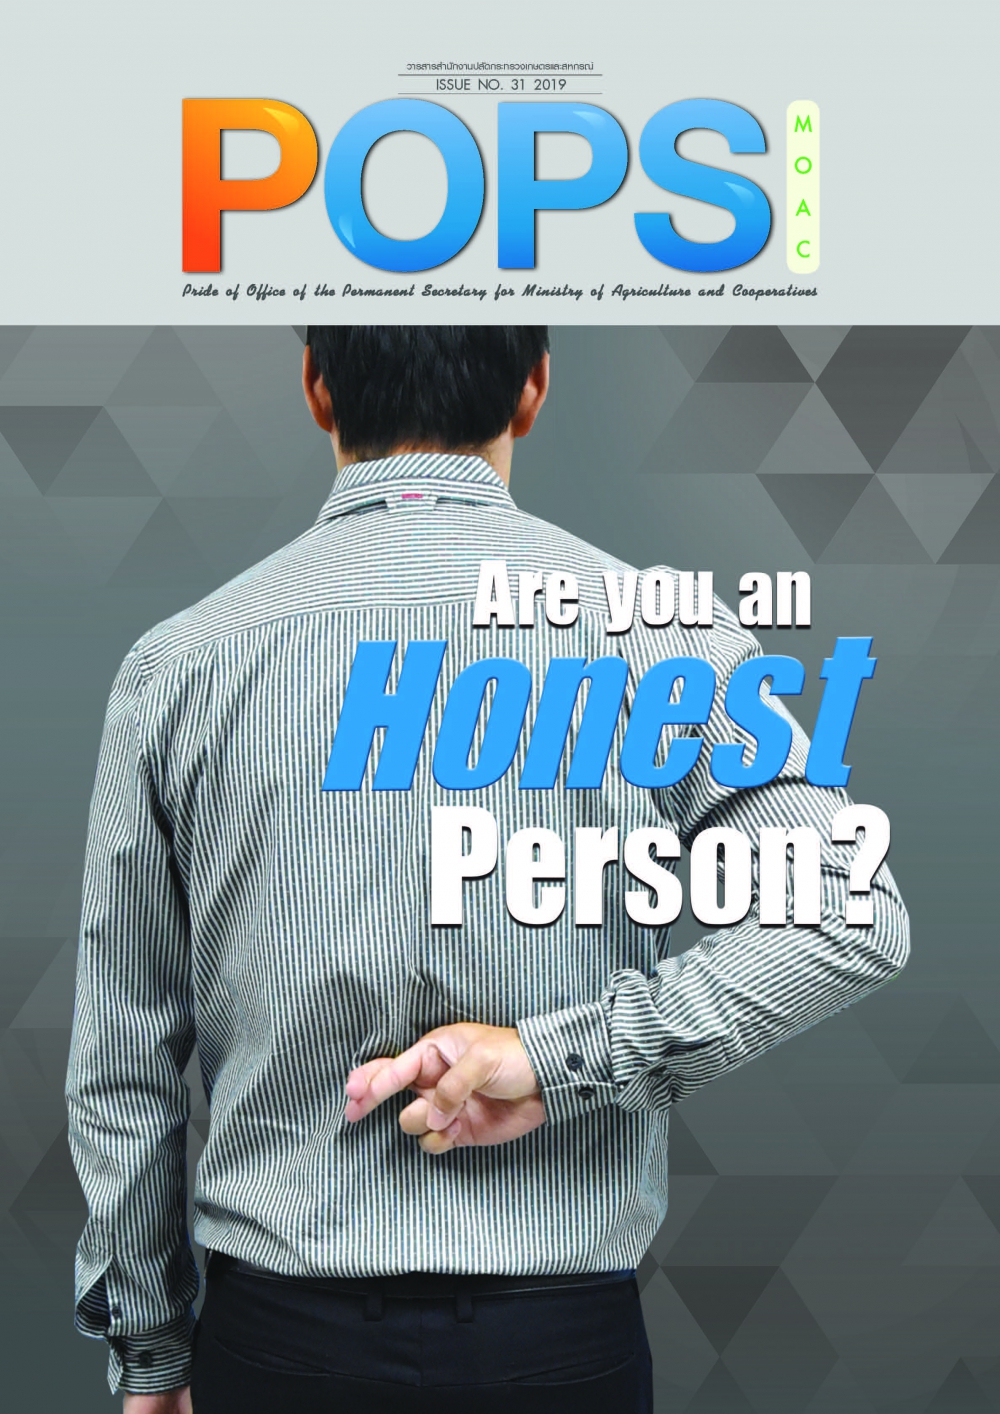 POPS จดหมายข่าว สป.กษ. ISSUE NO.31-2019-Are you an Honest Person?